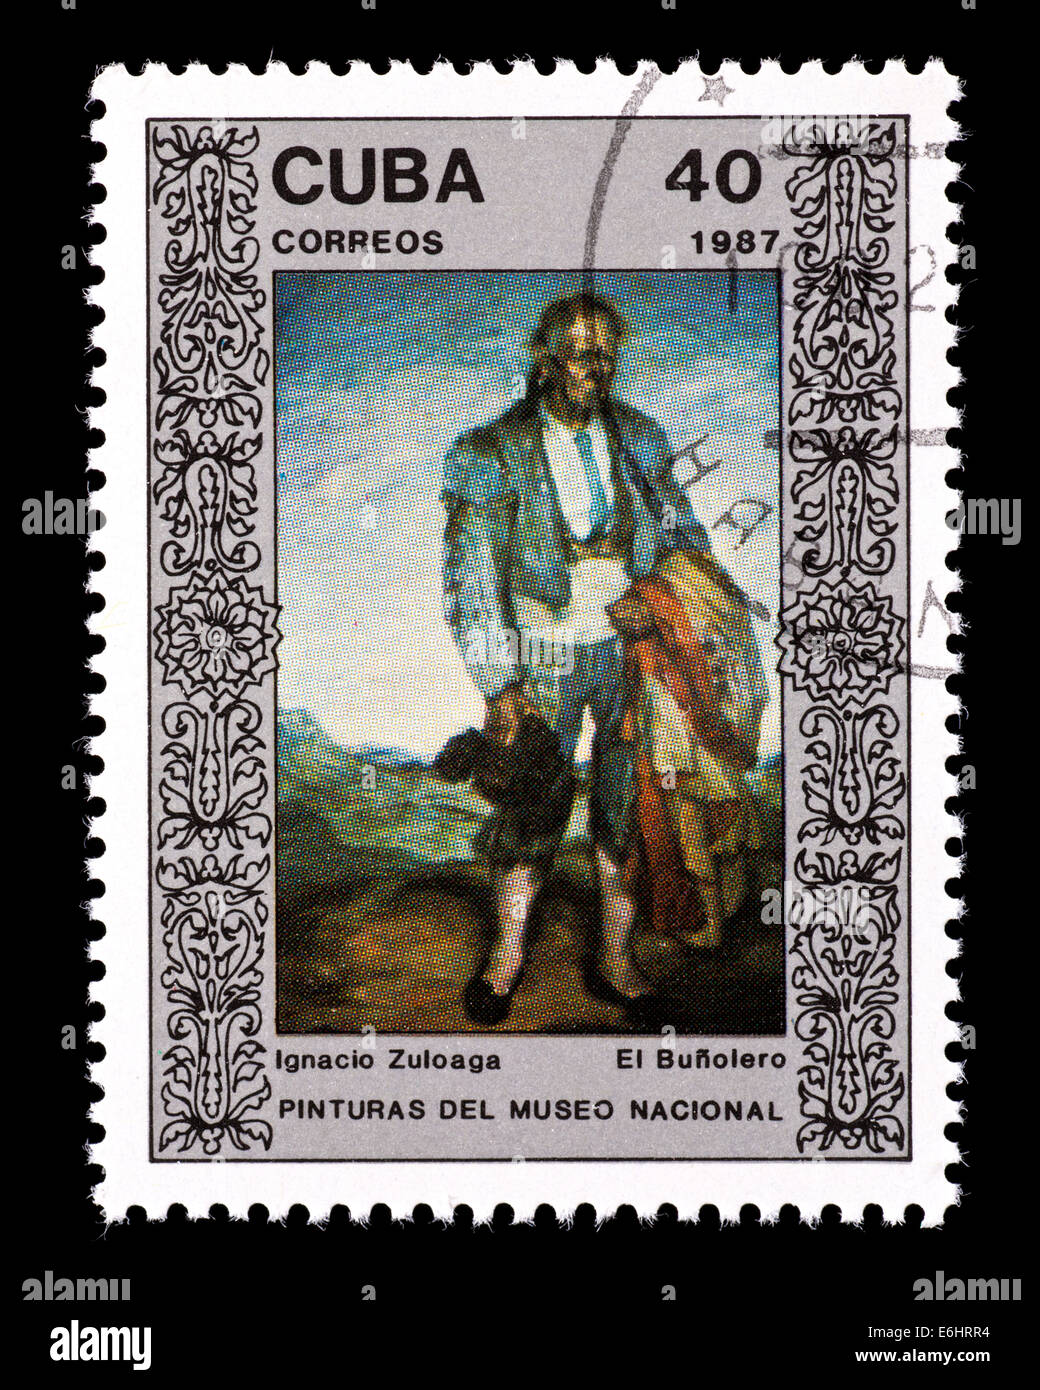 POstage stamp from Cuba depicting the Ignacio Zuloaga painting 'The Failure (defeated bullfighter)' Stock Photo